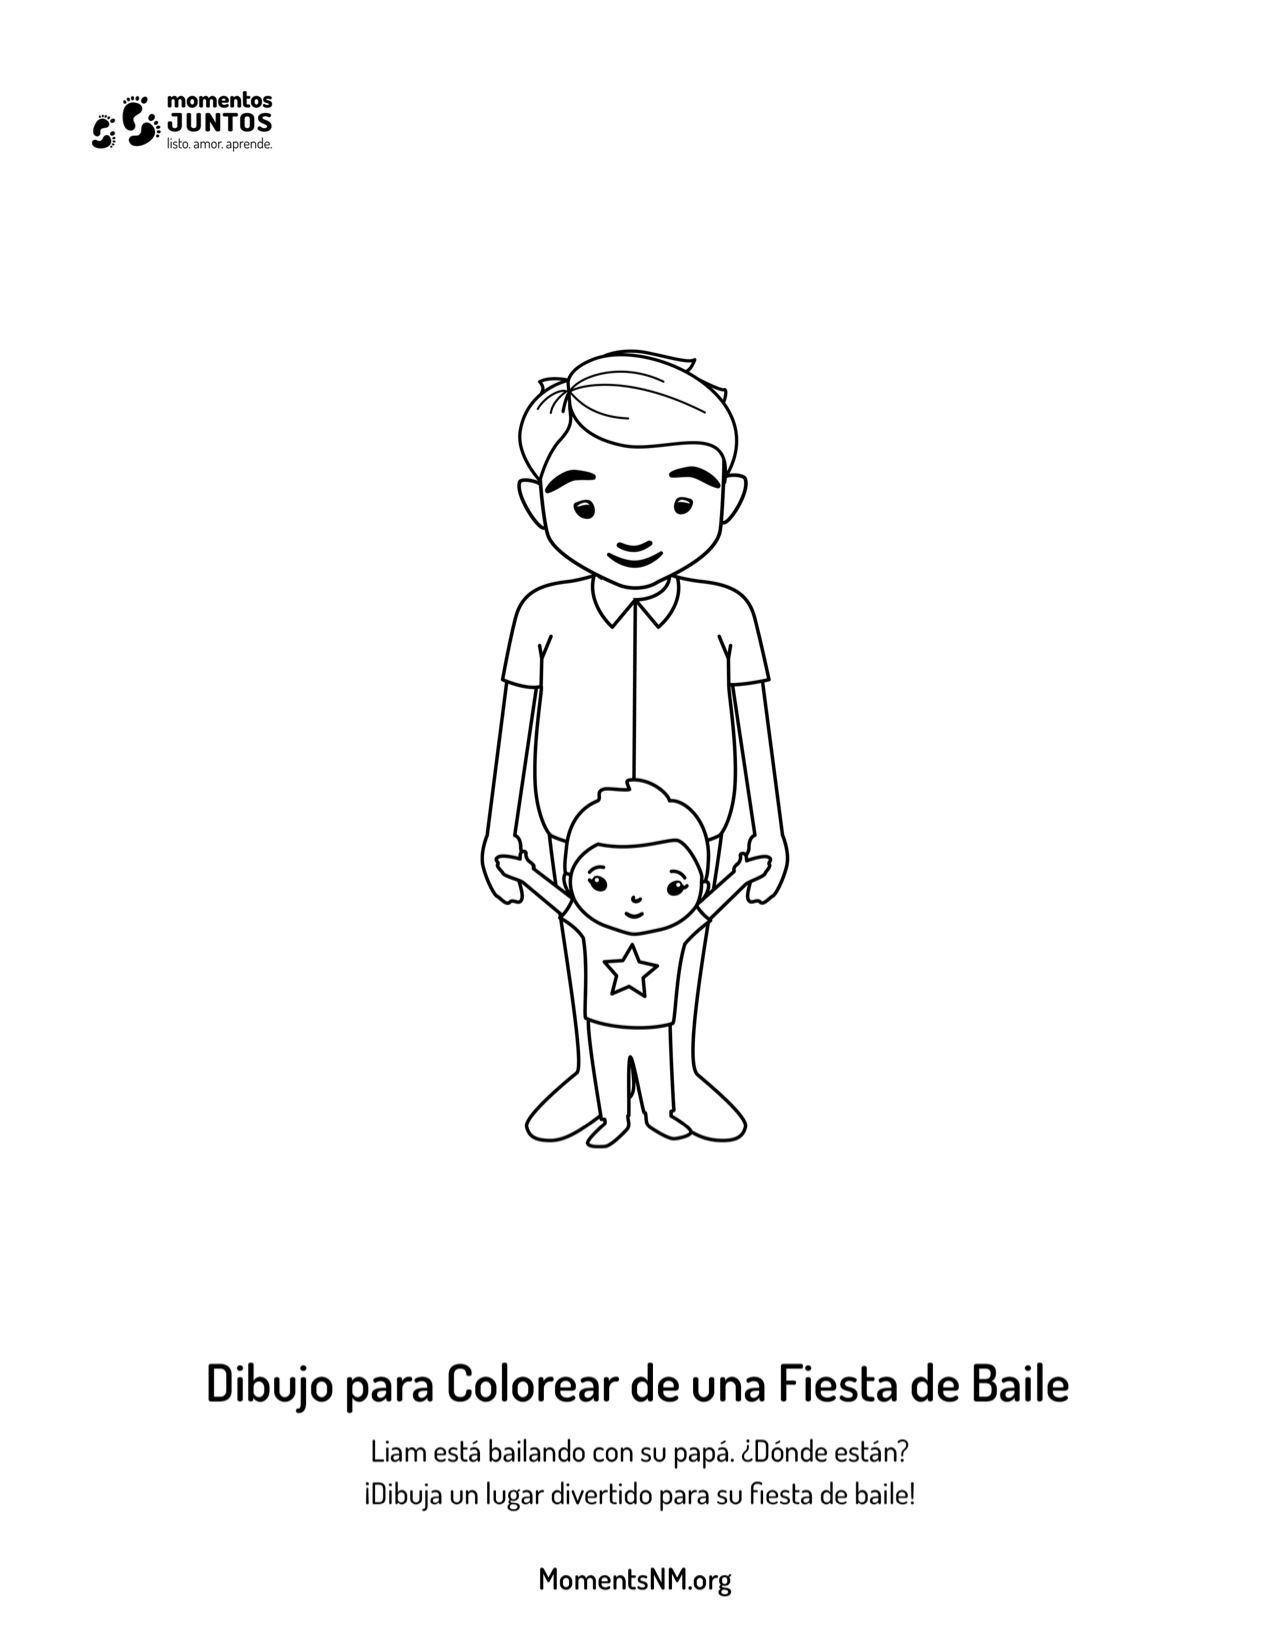 Father standing with son coloring sheet